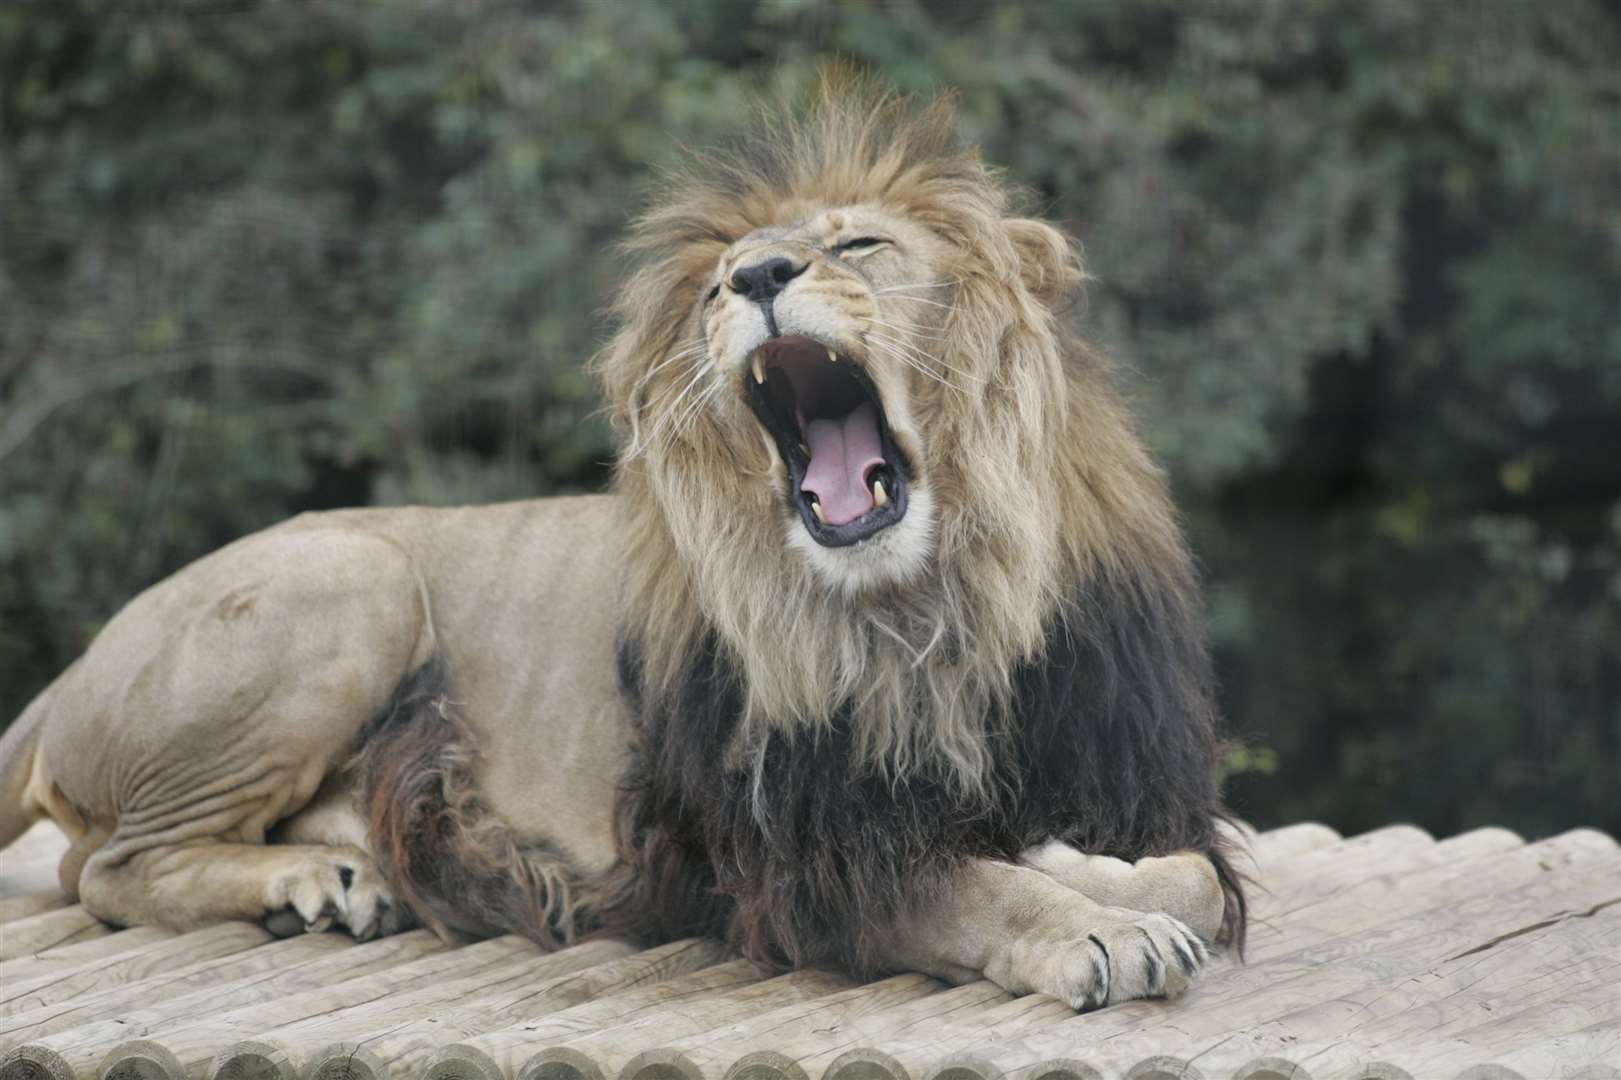 You can be more active than the lions at Howletts